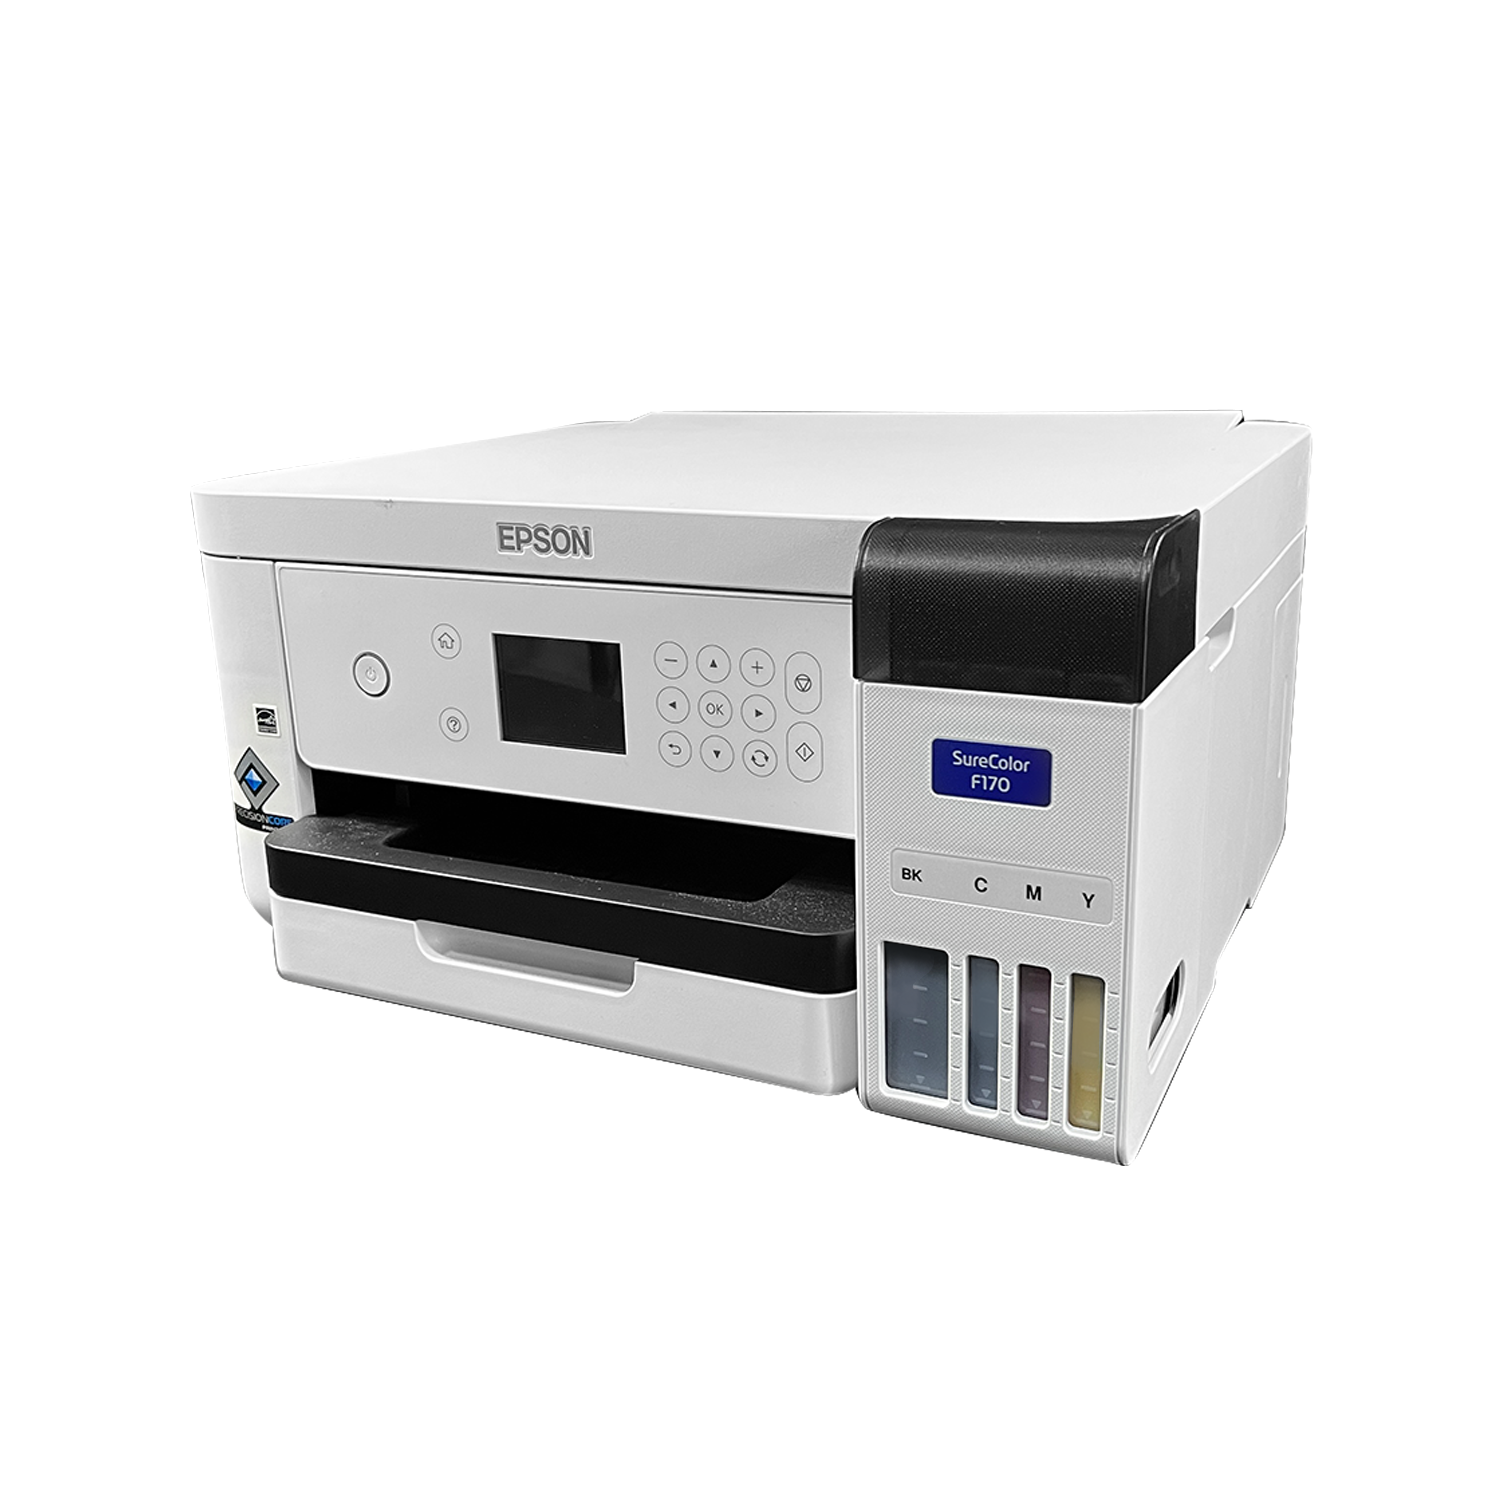 Epson 170 Sublimation Printer | Cyber Days Deal